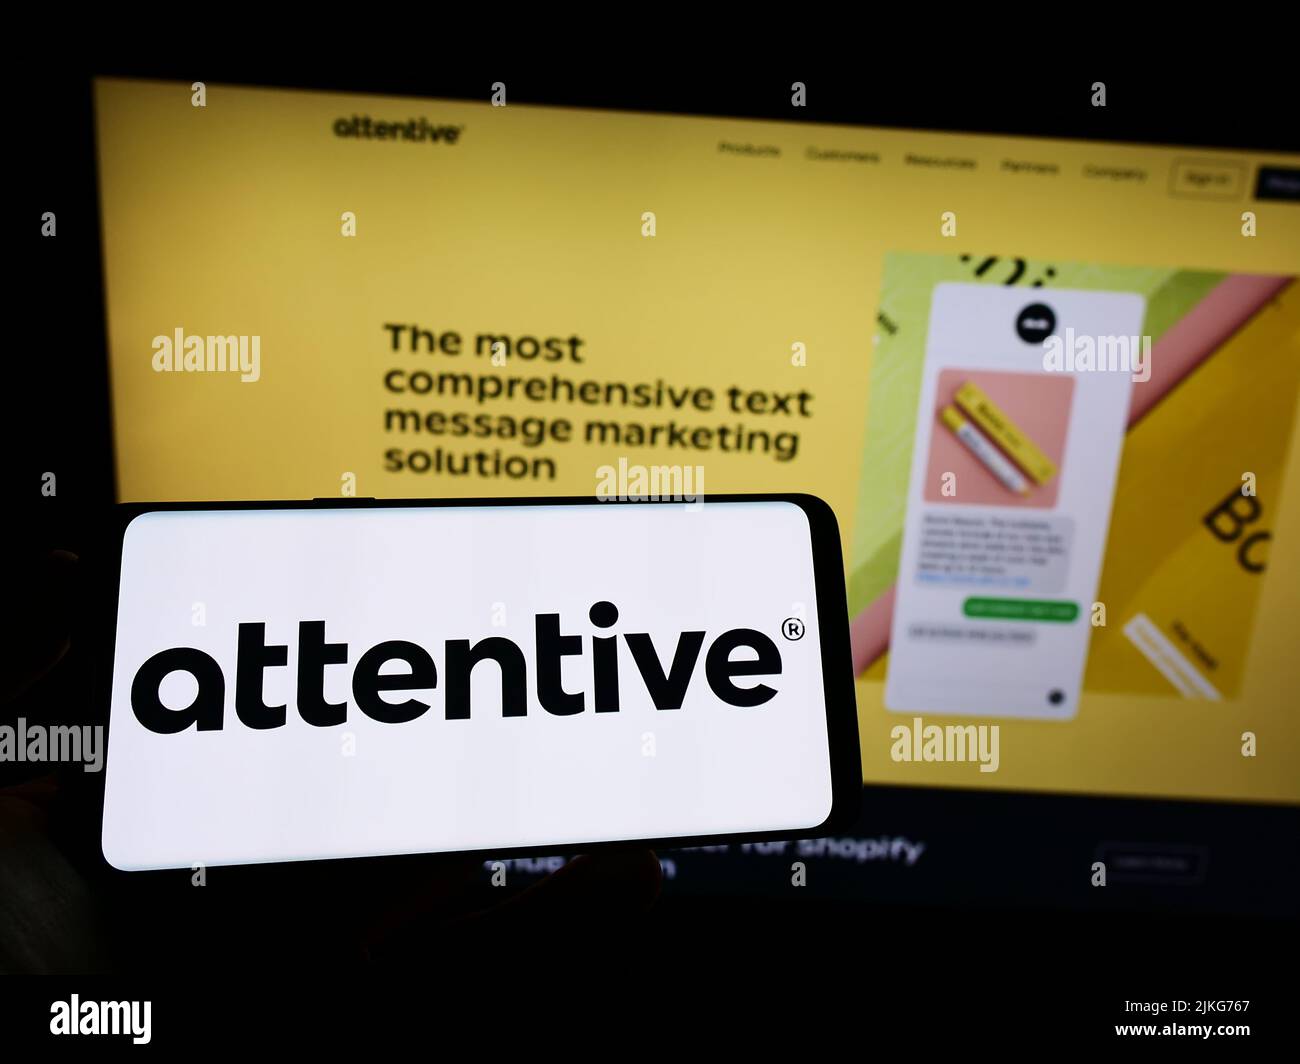 Person holding mobile phone with logo of American marketing company Attentive Mobile Inc. on screen in front of web page. Focus on phone display. Stock Photo